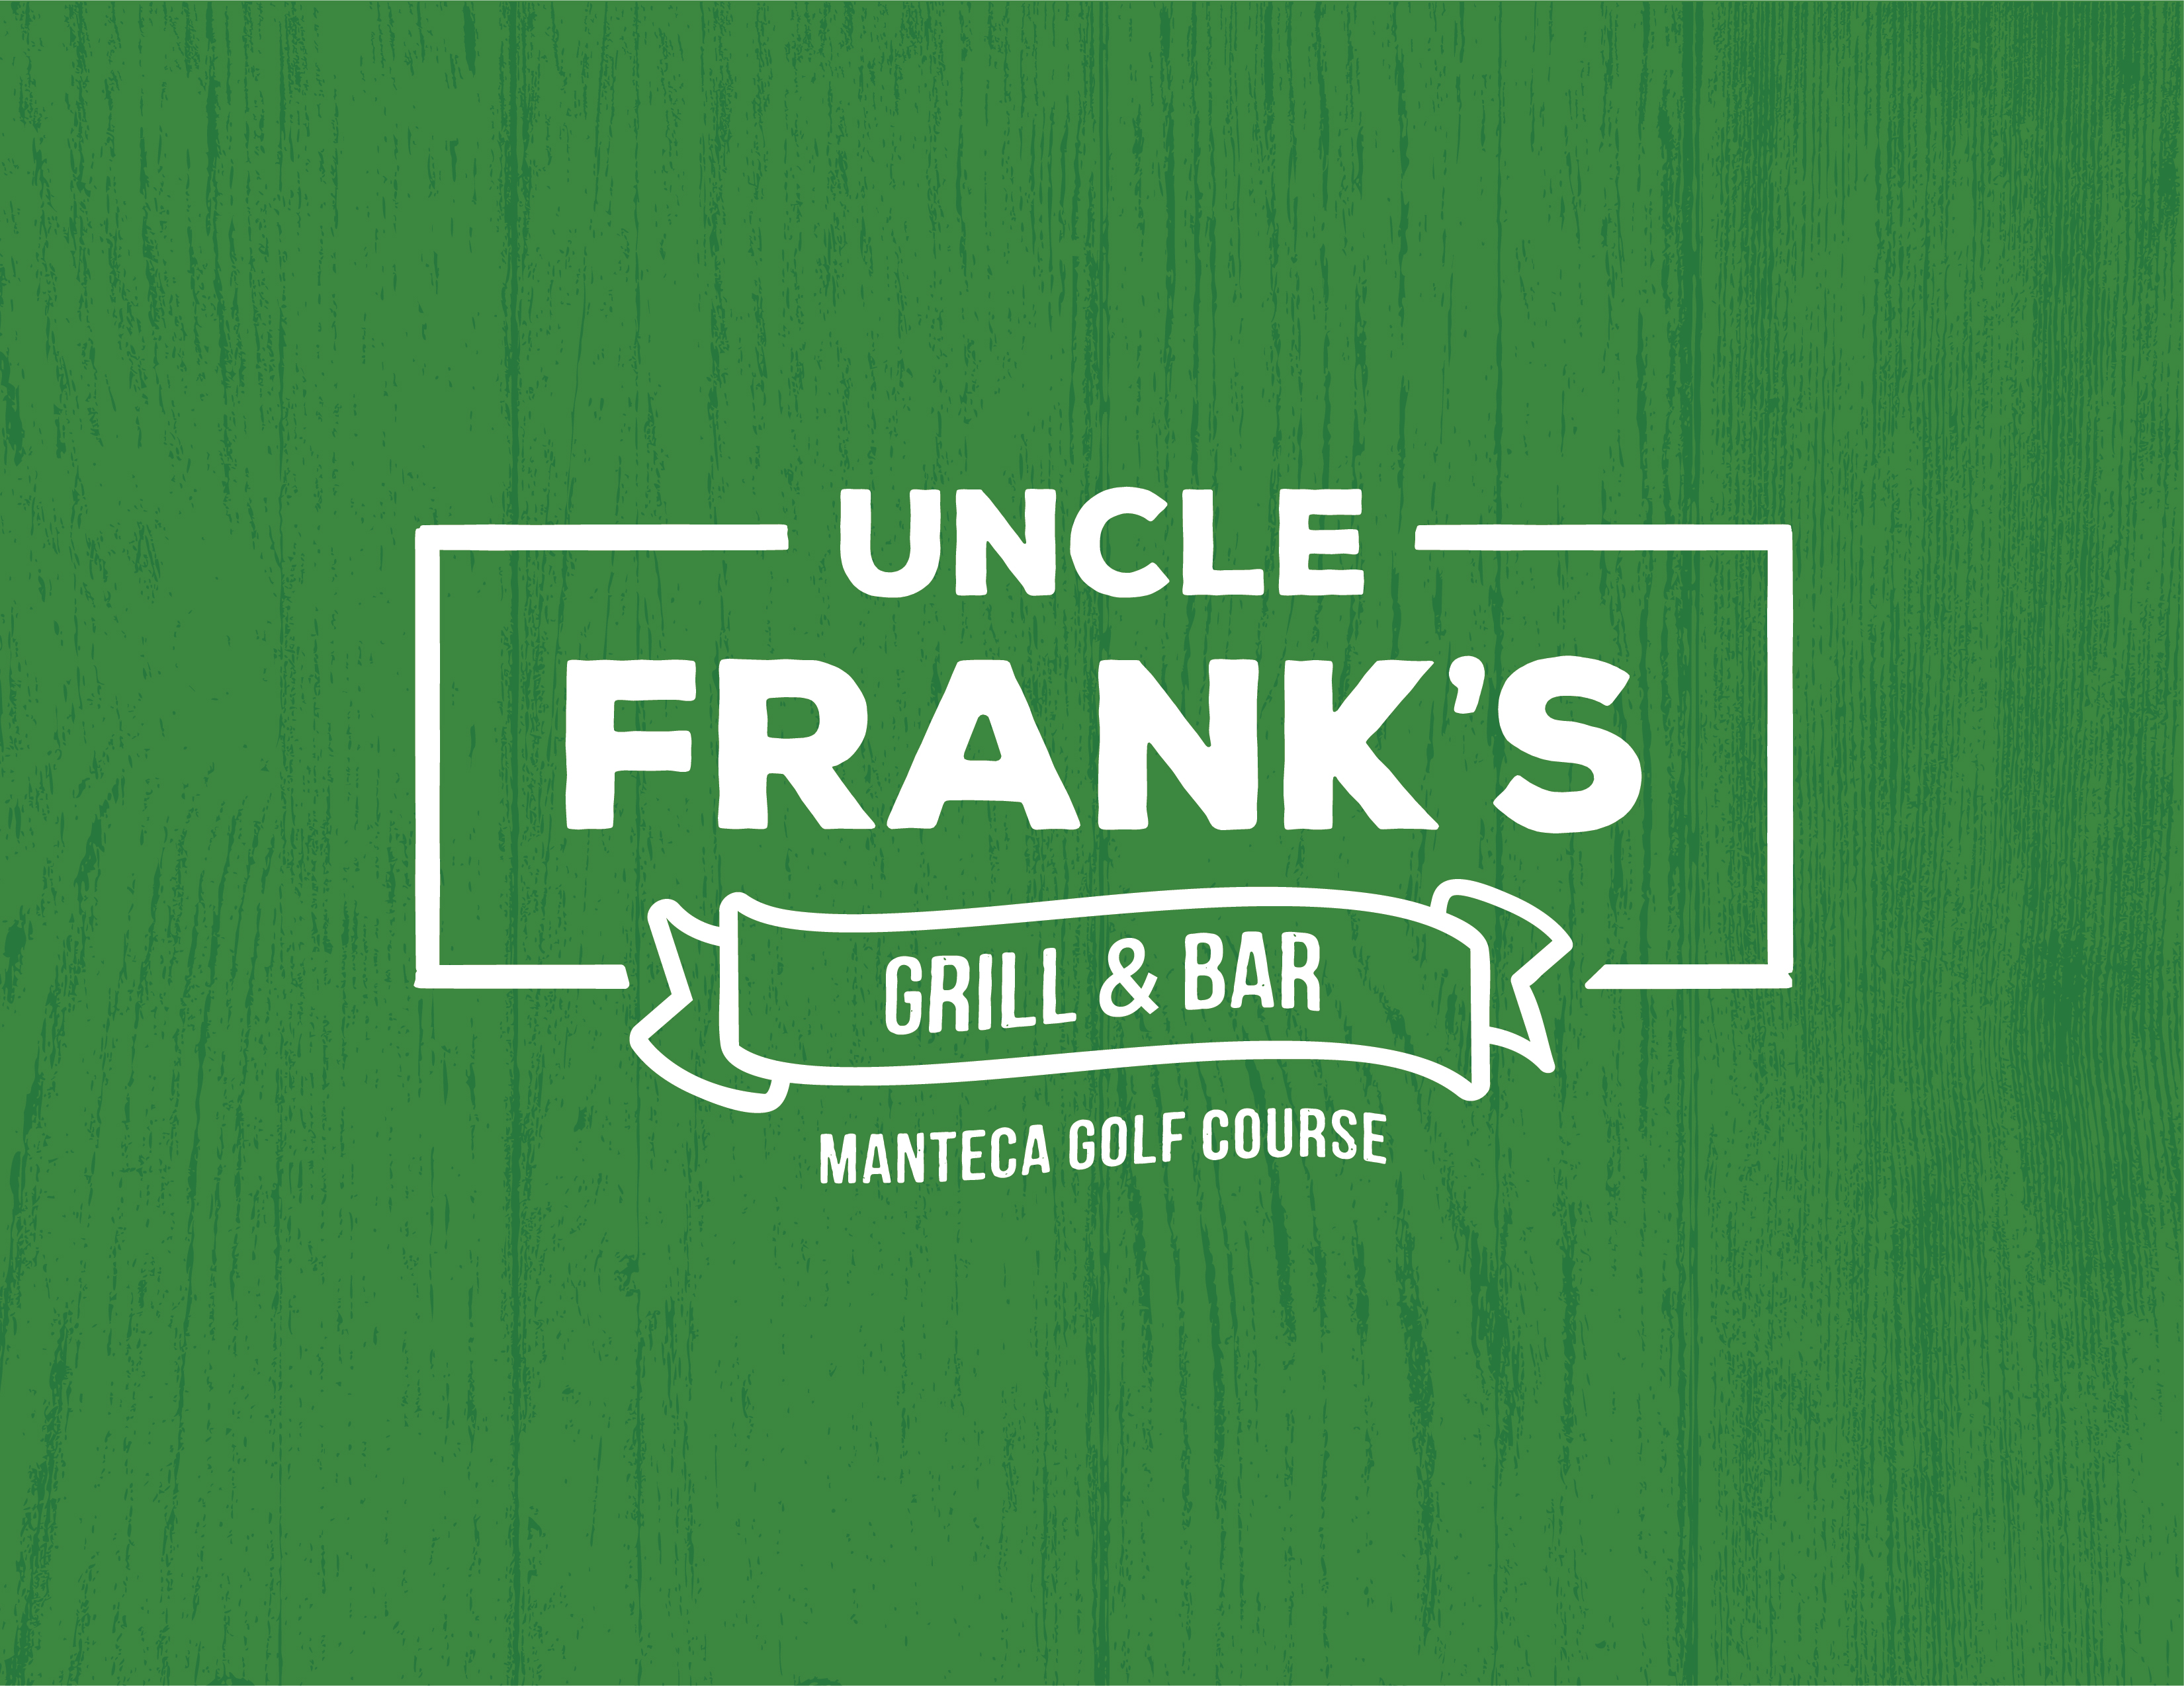 Uncle Frank's Grill & Bar